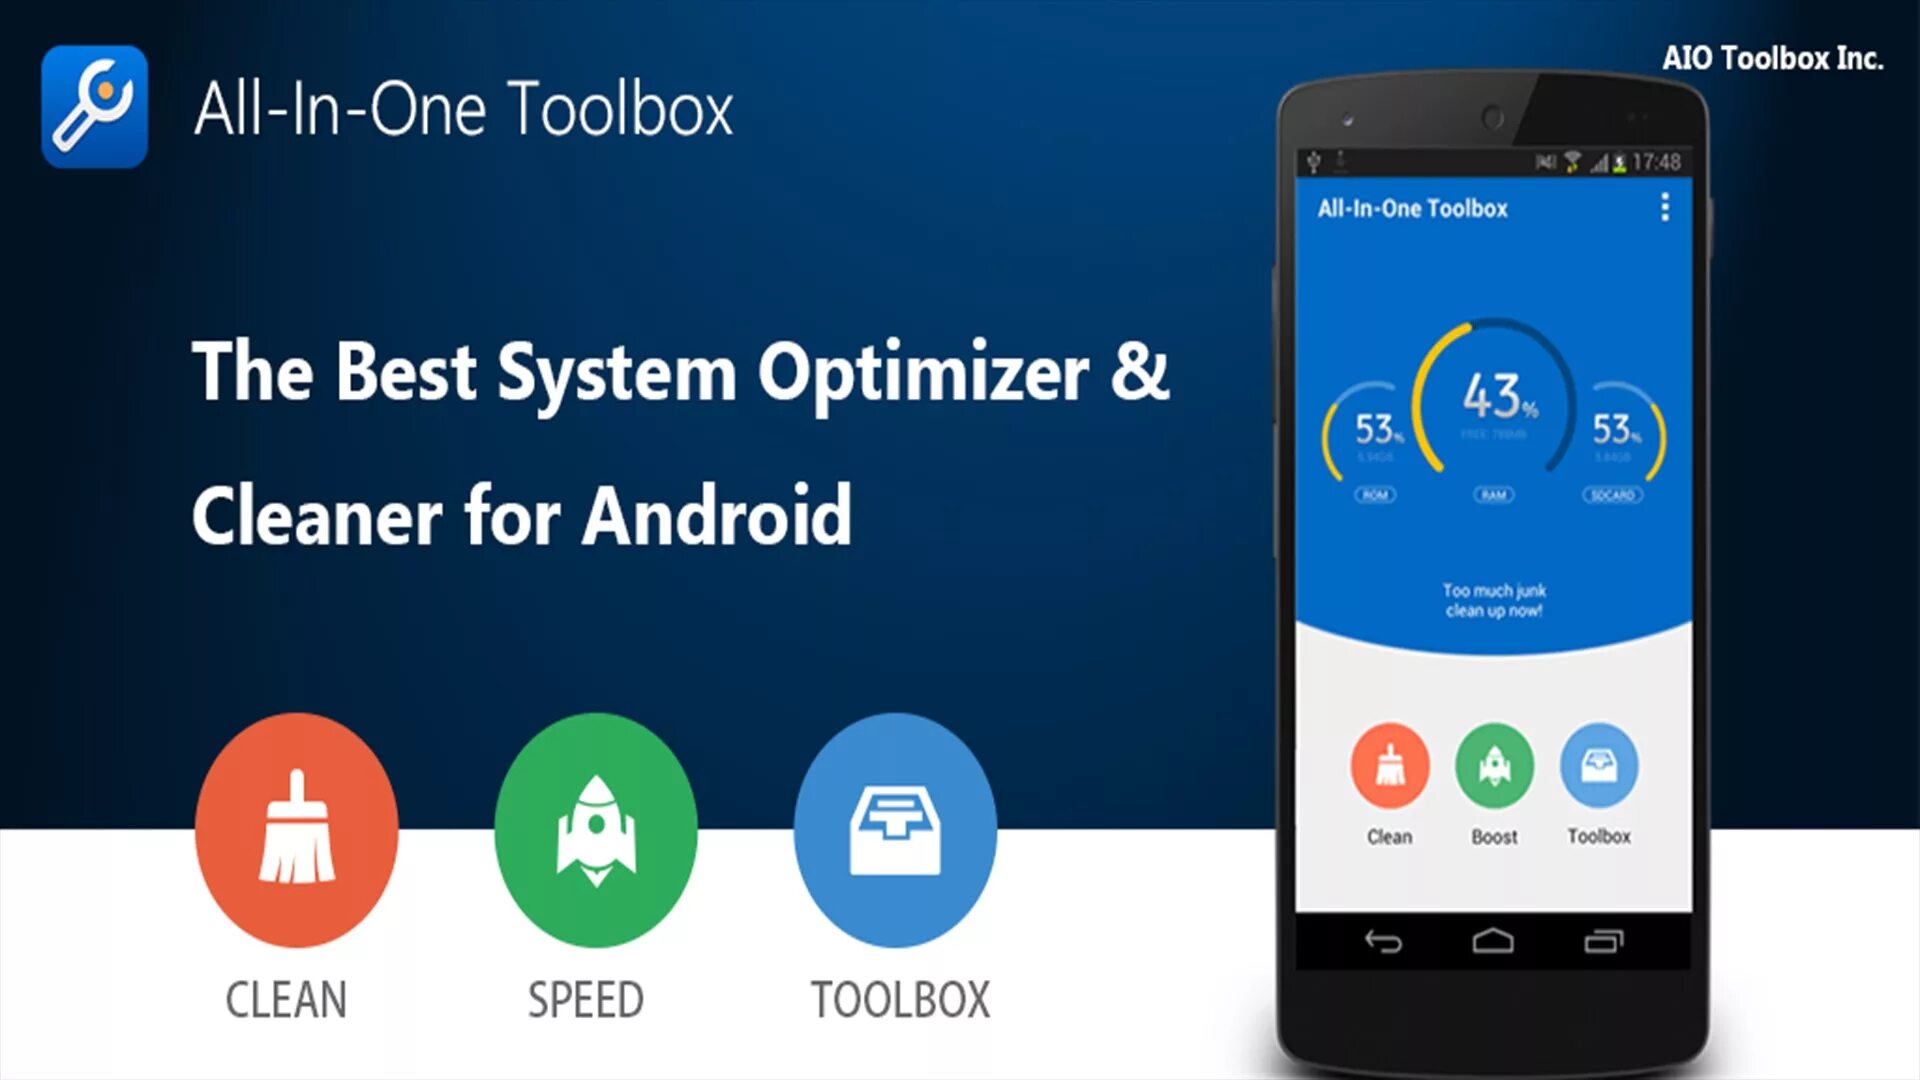 Clean apk pro. All-in-one Toolbox на андроид. Android Cleaner. Андроид клинер. All-in-one Toolbox Pro приложение.